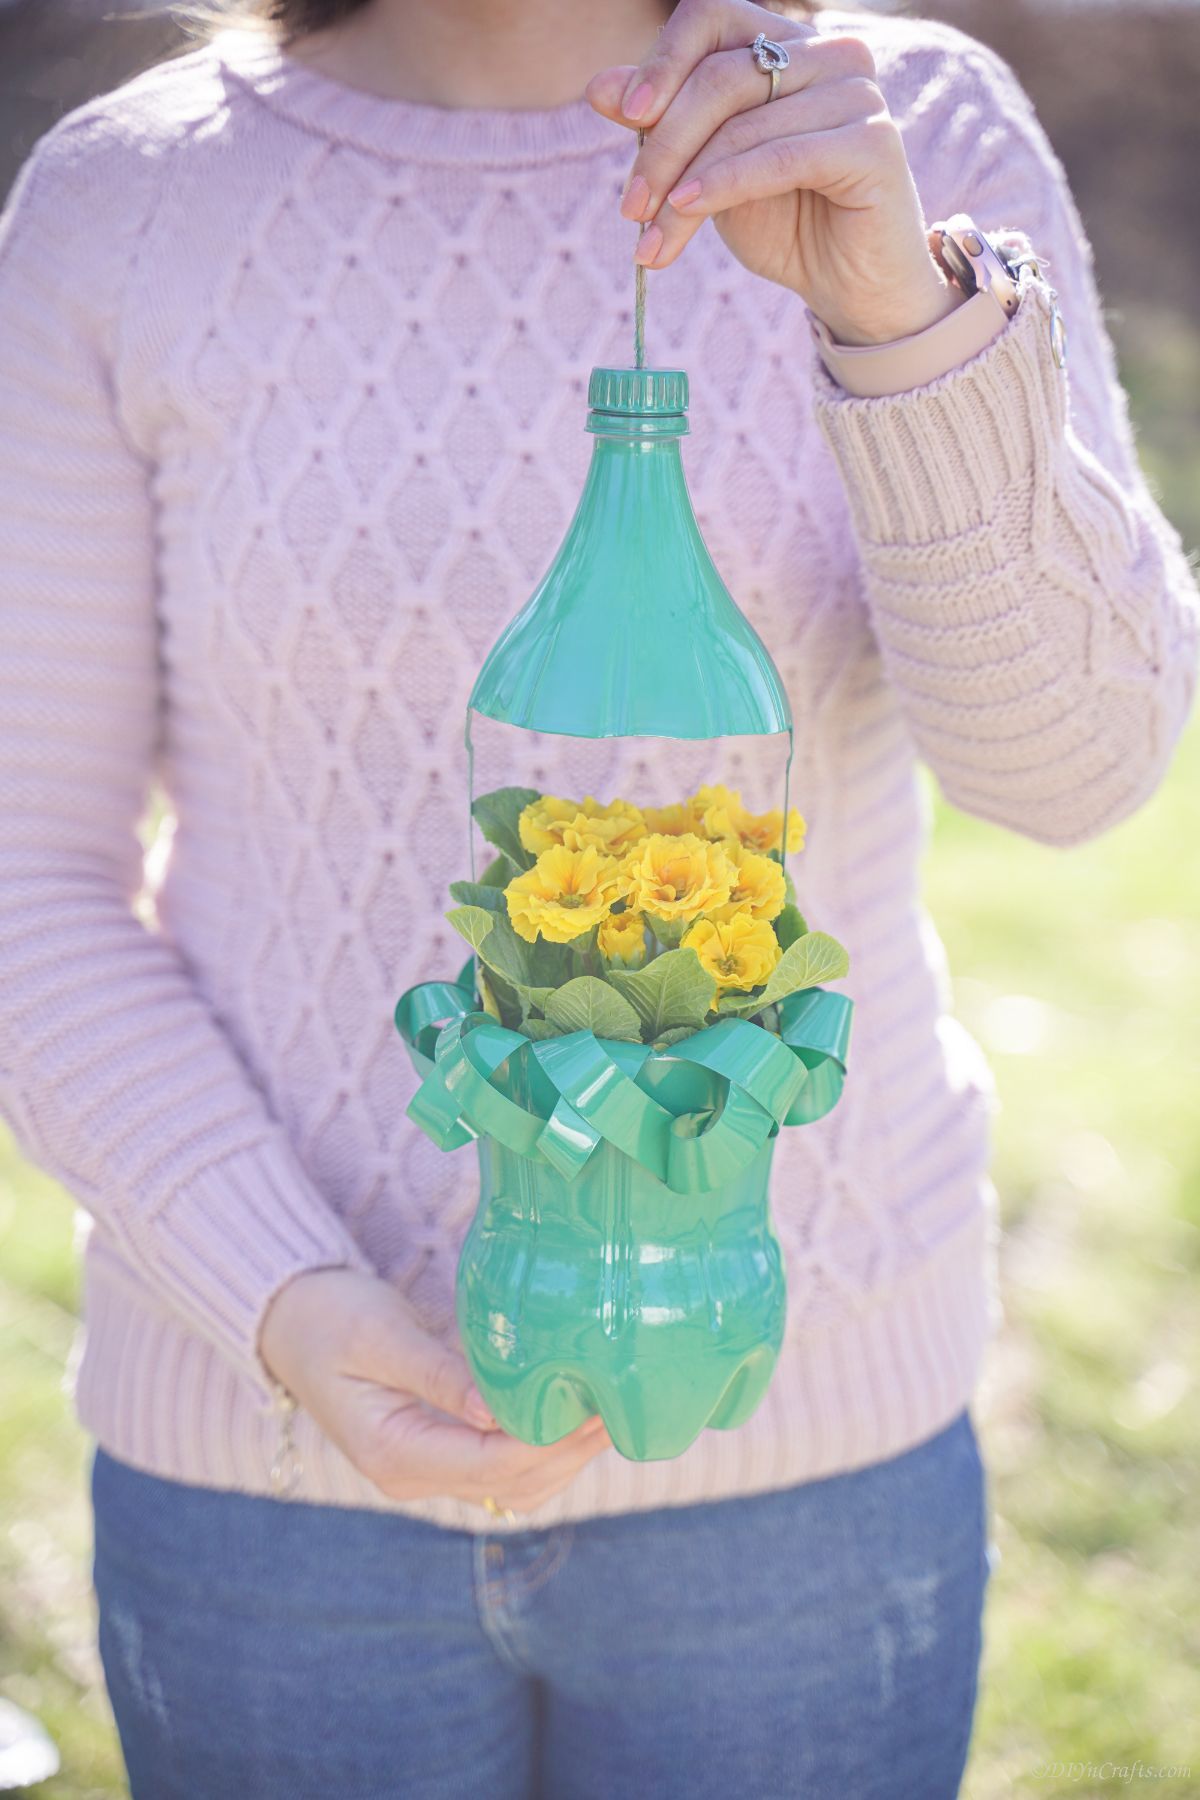 green bottle planter with yellow flowers held by woman in pink